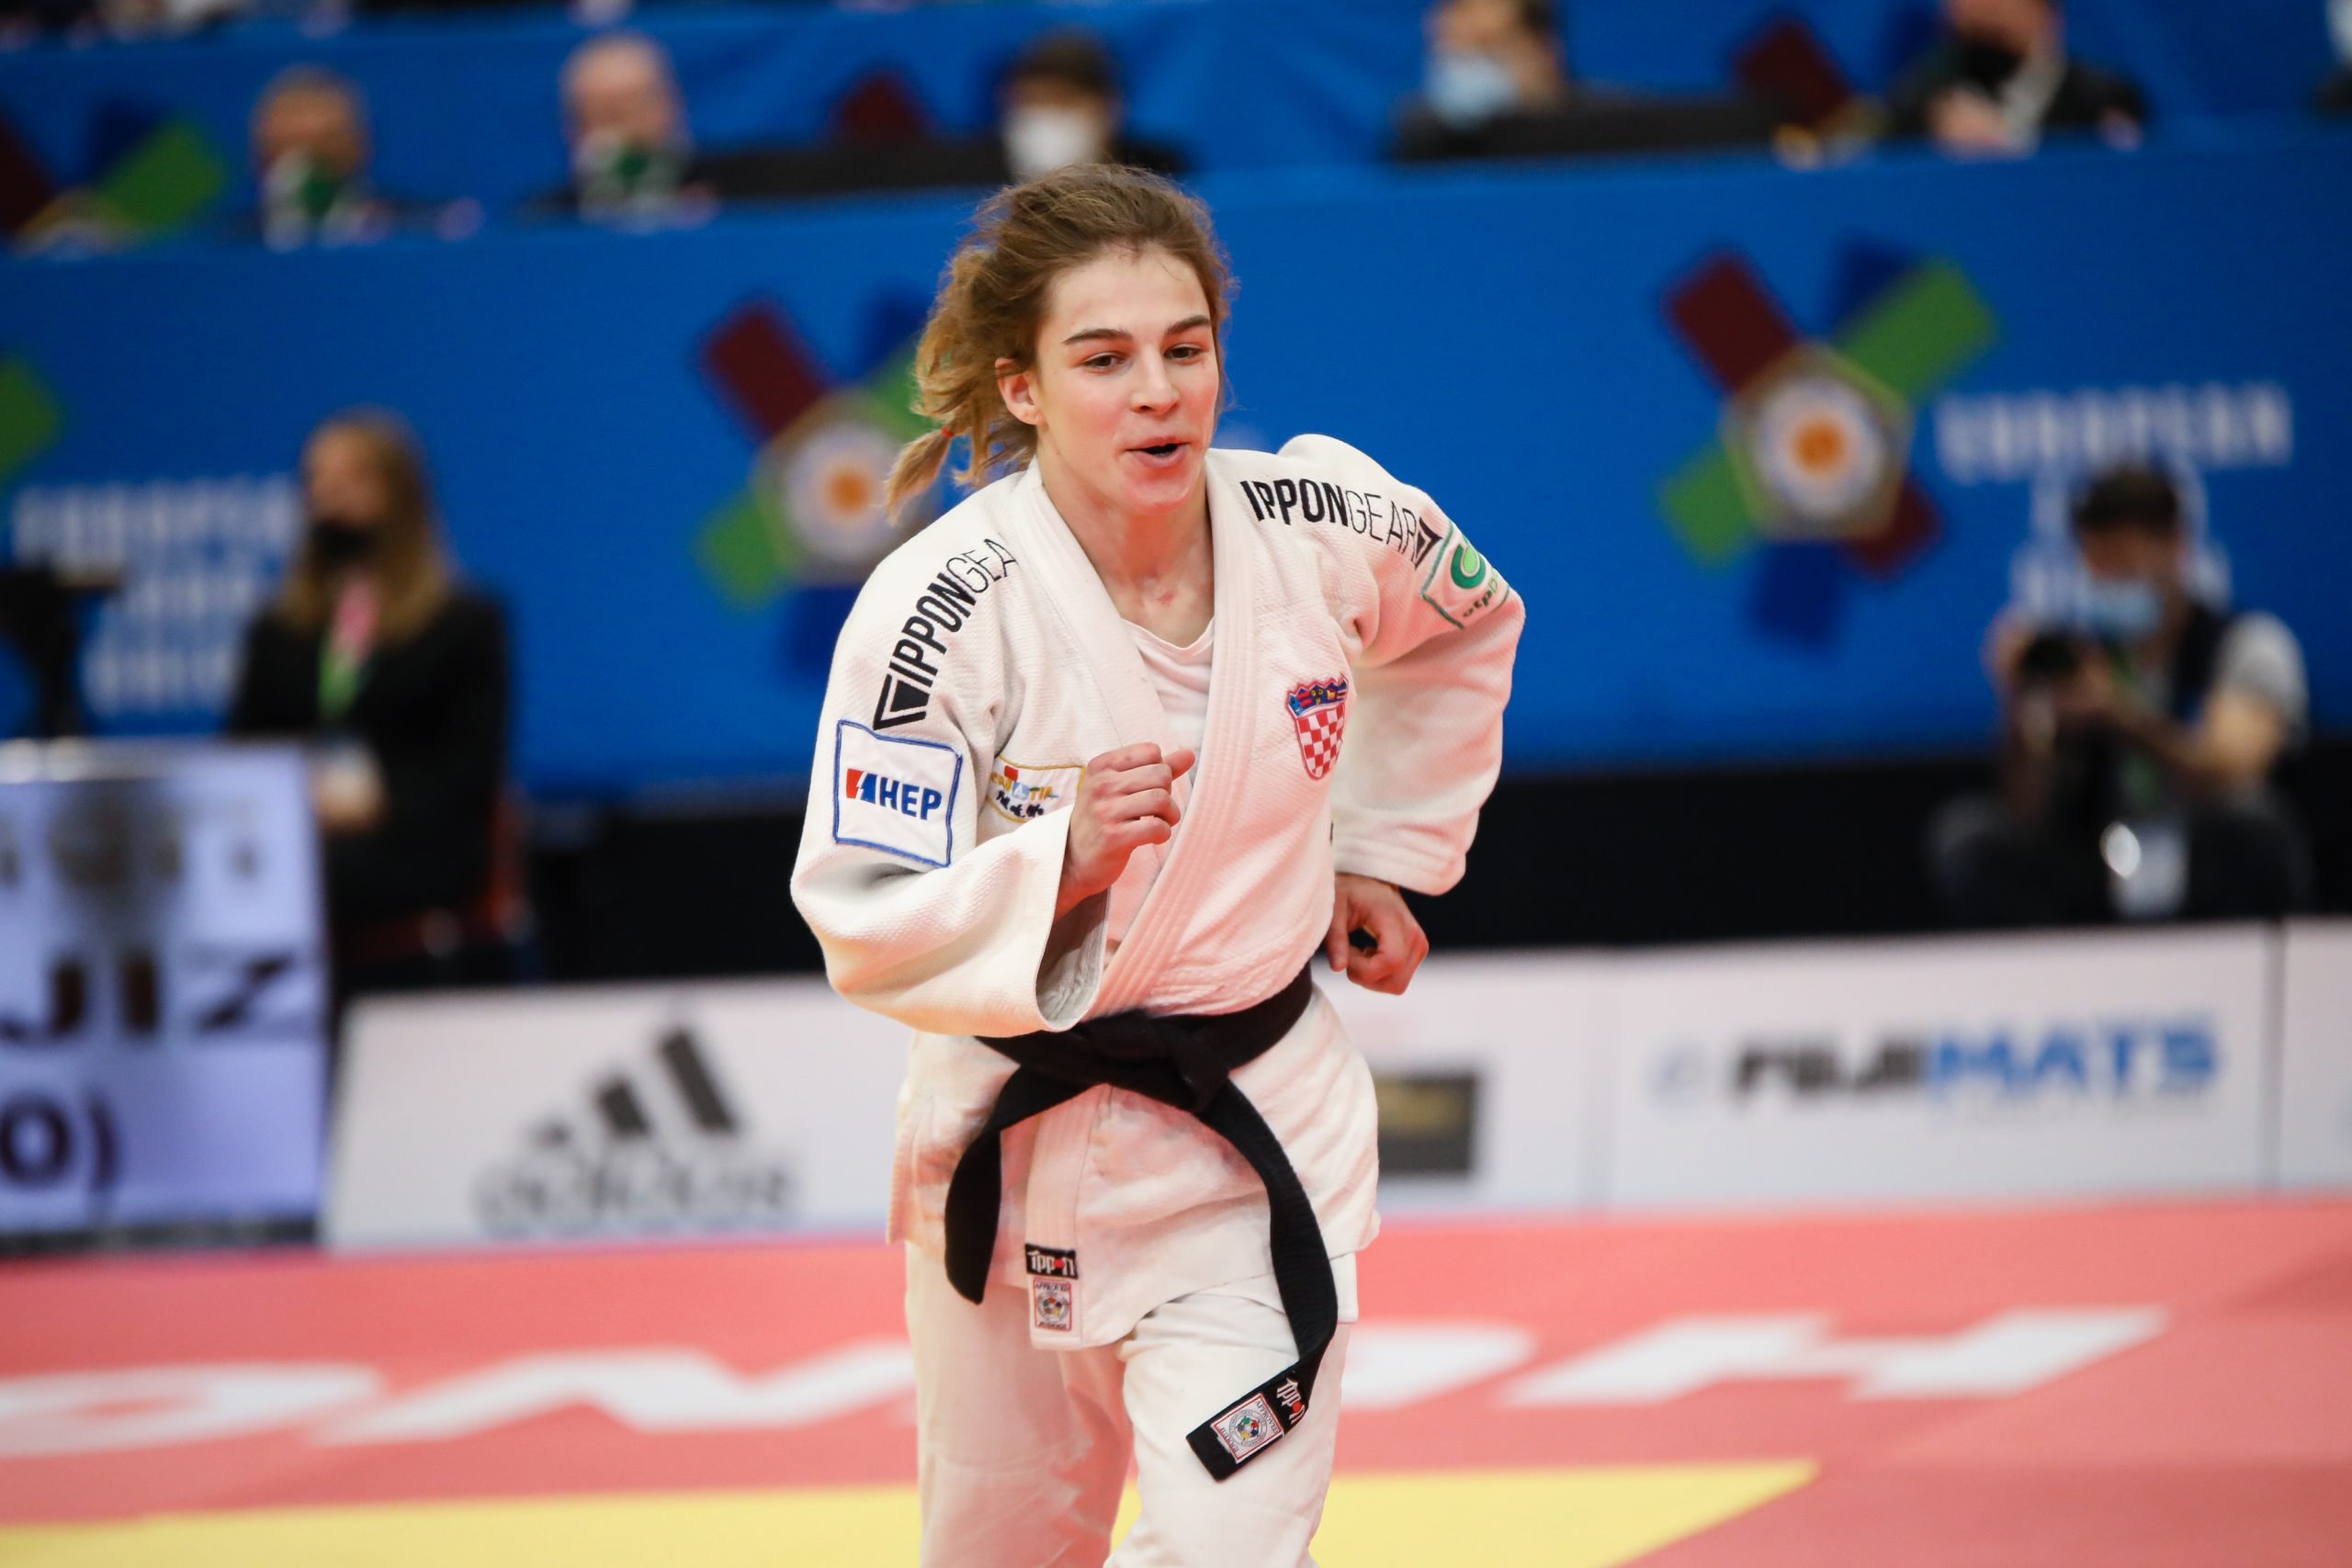 FIFTEEN NATIONS GRAB MEDALS ON DAY ONE OF U23 EUROPEANS